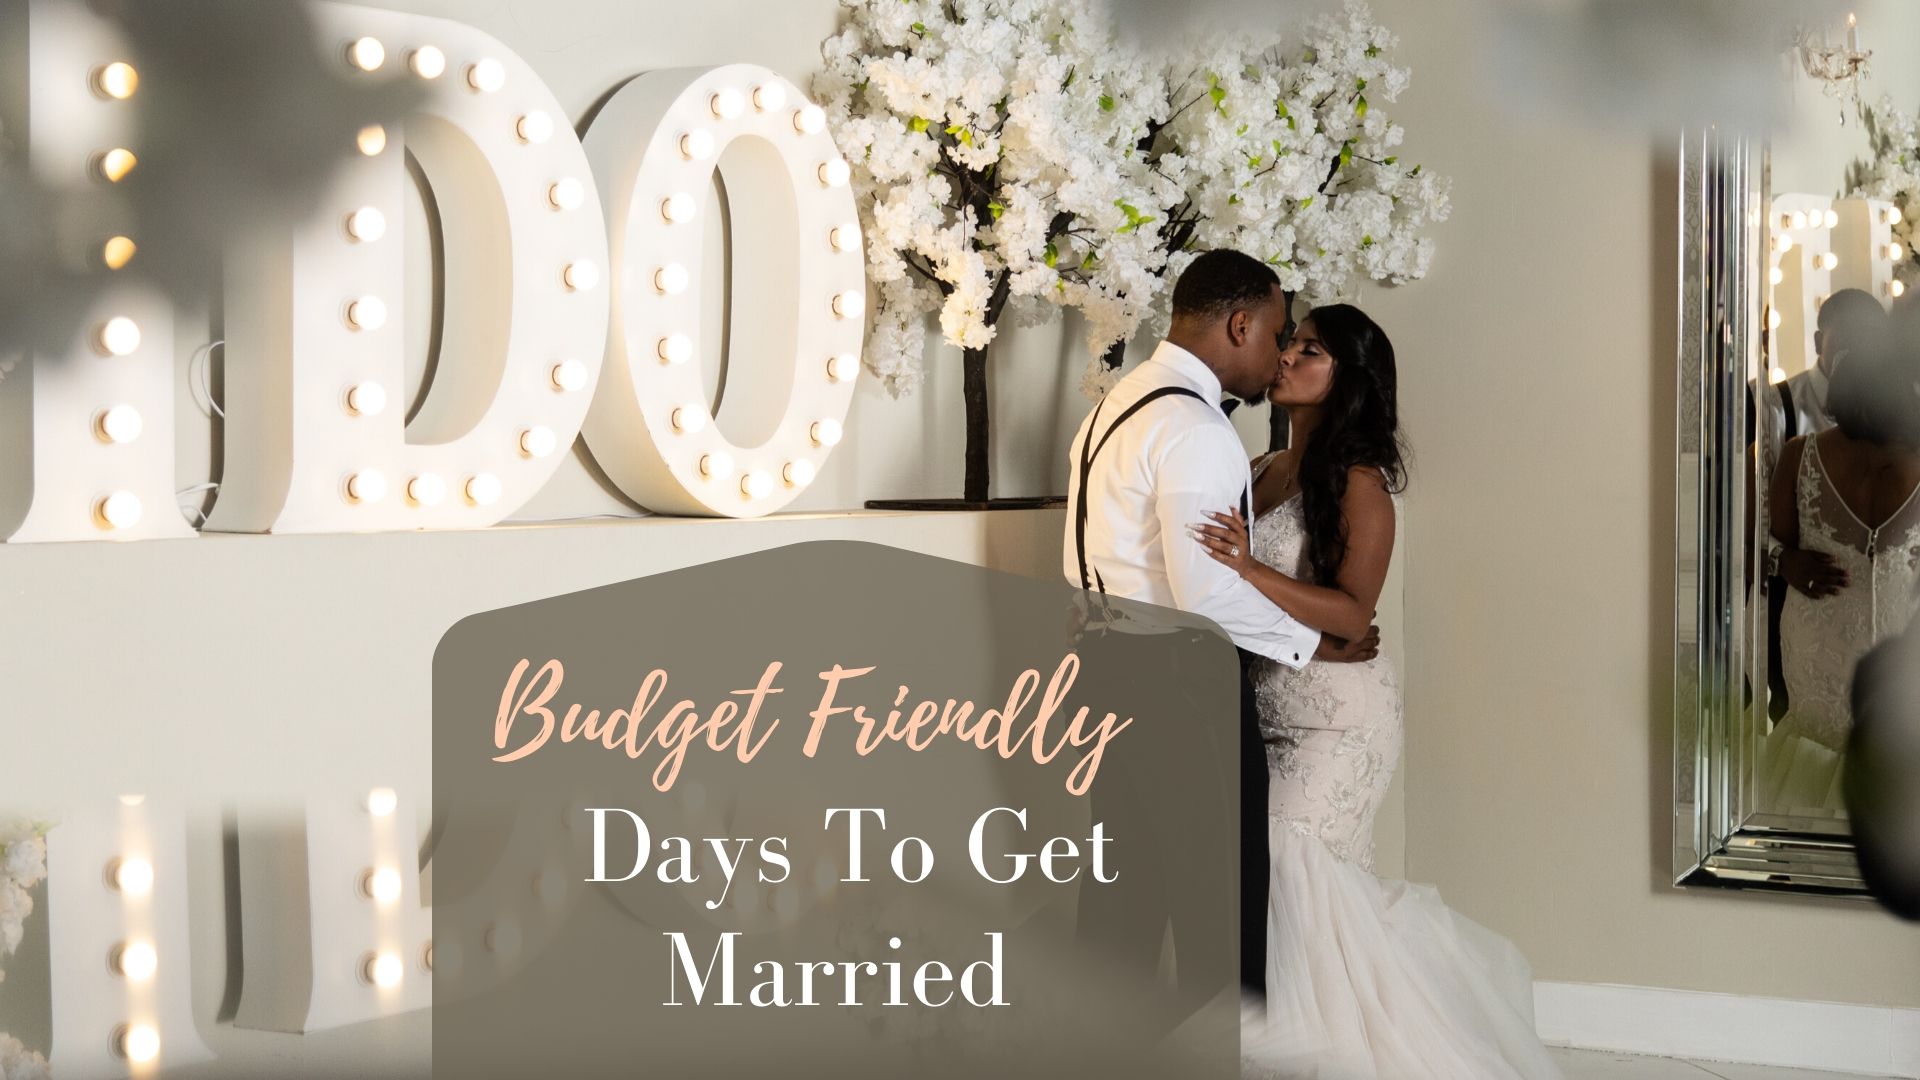 Budget-Friendly Days To Get Married